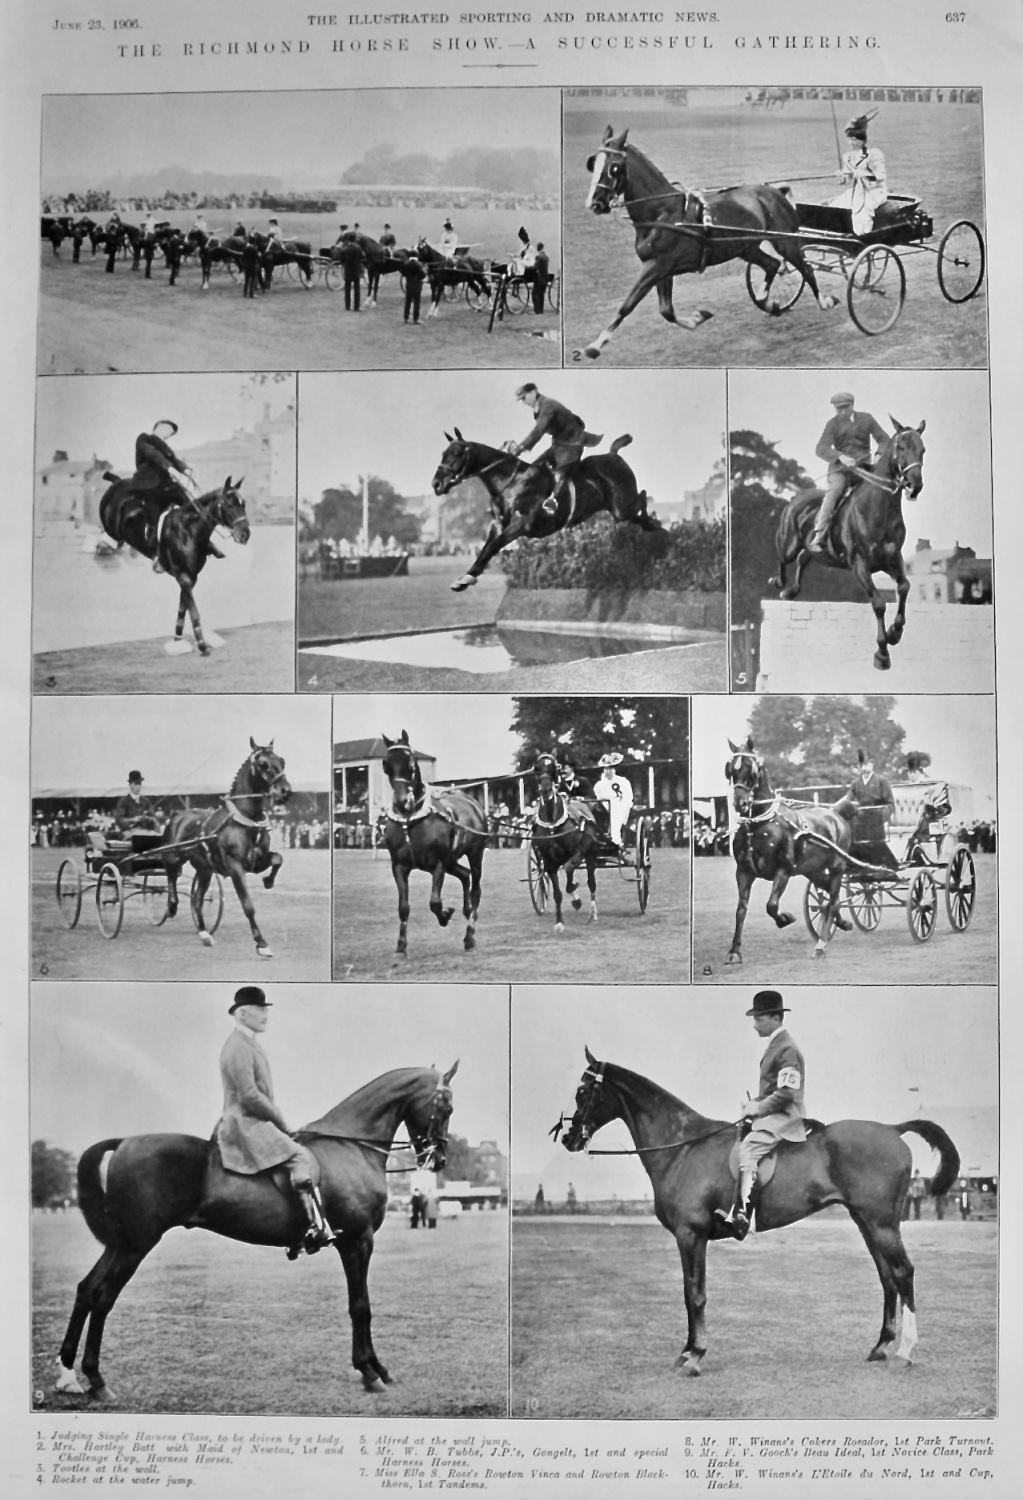 The Richmond Horse Show.- A Successful Gathering.  1906.